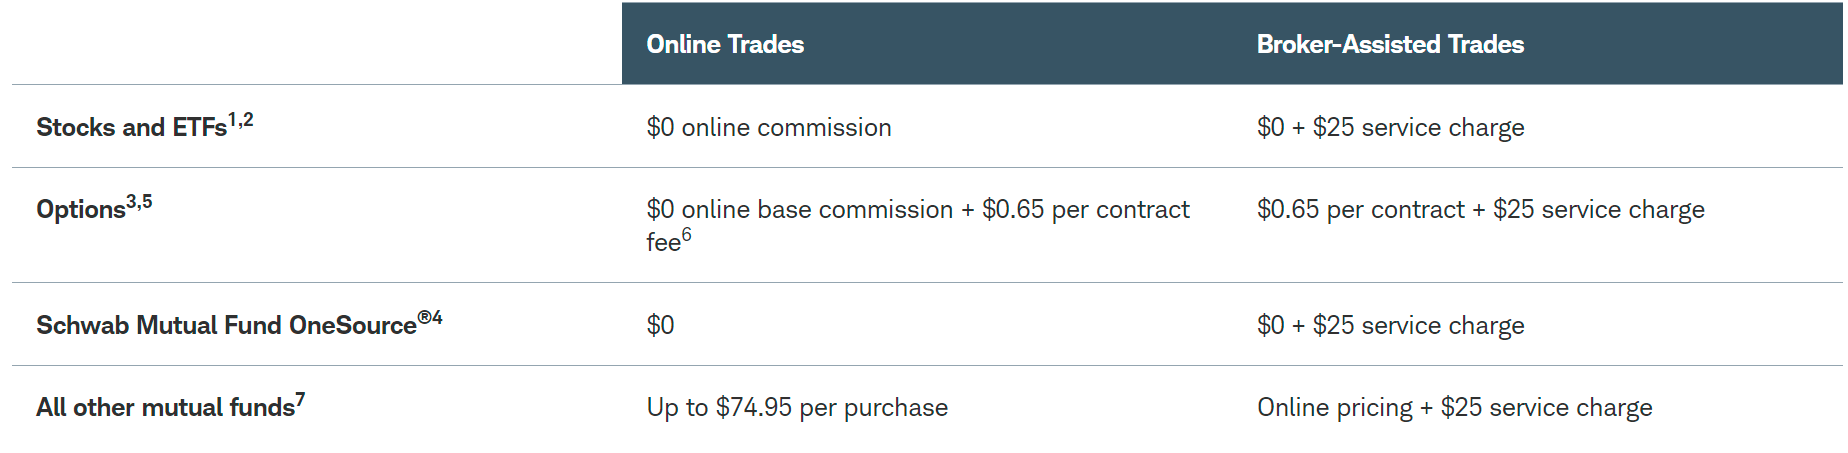 Charles Schwab trading fees and commissions